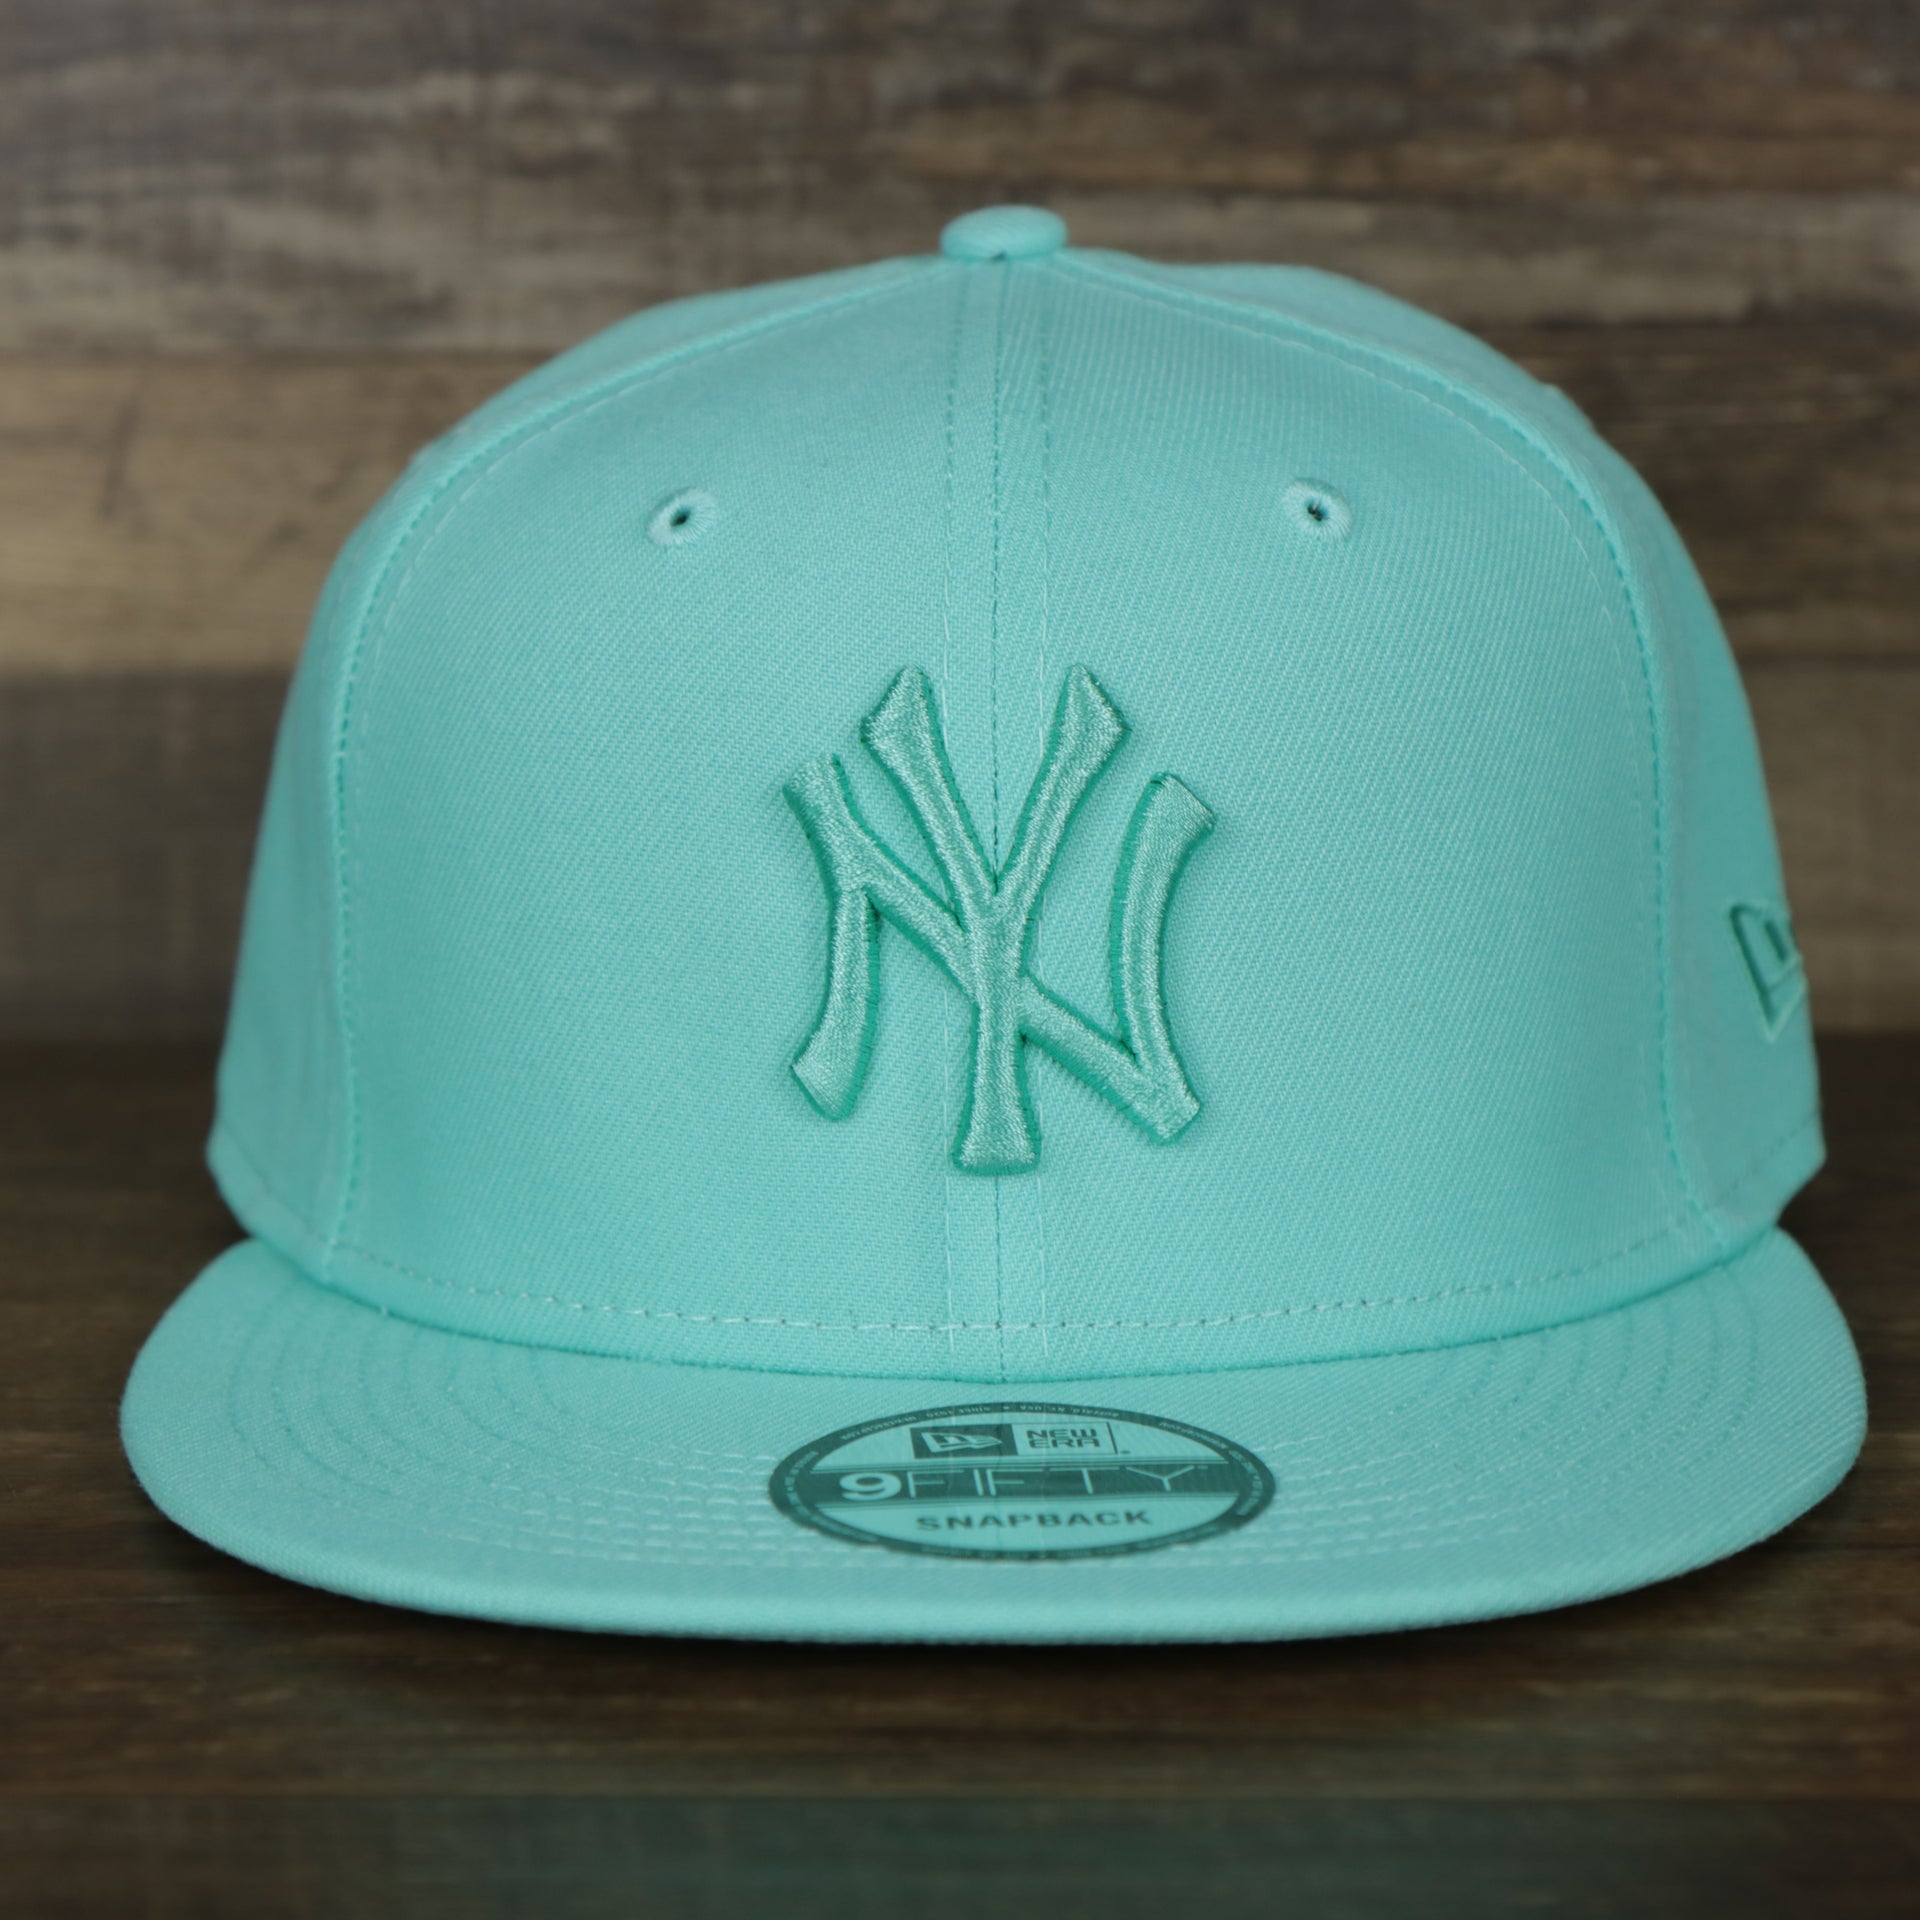 The front of the New York Yankees New Era Tonal 9Fifty Snapback